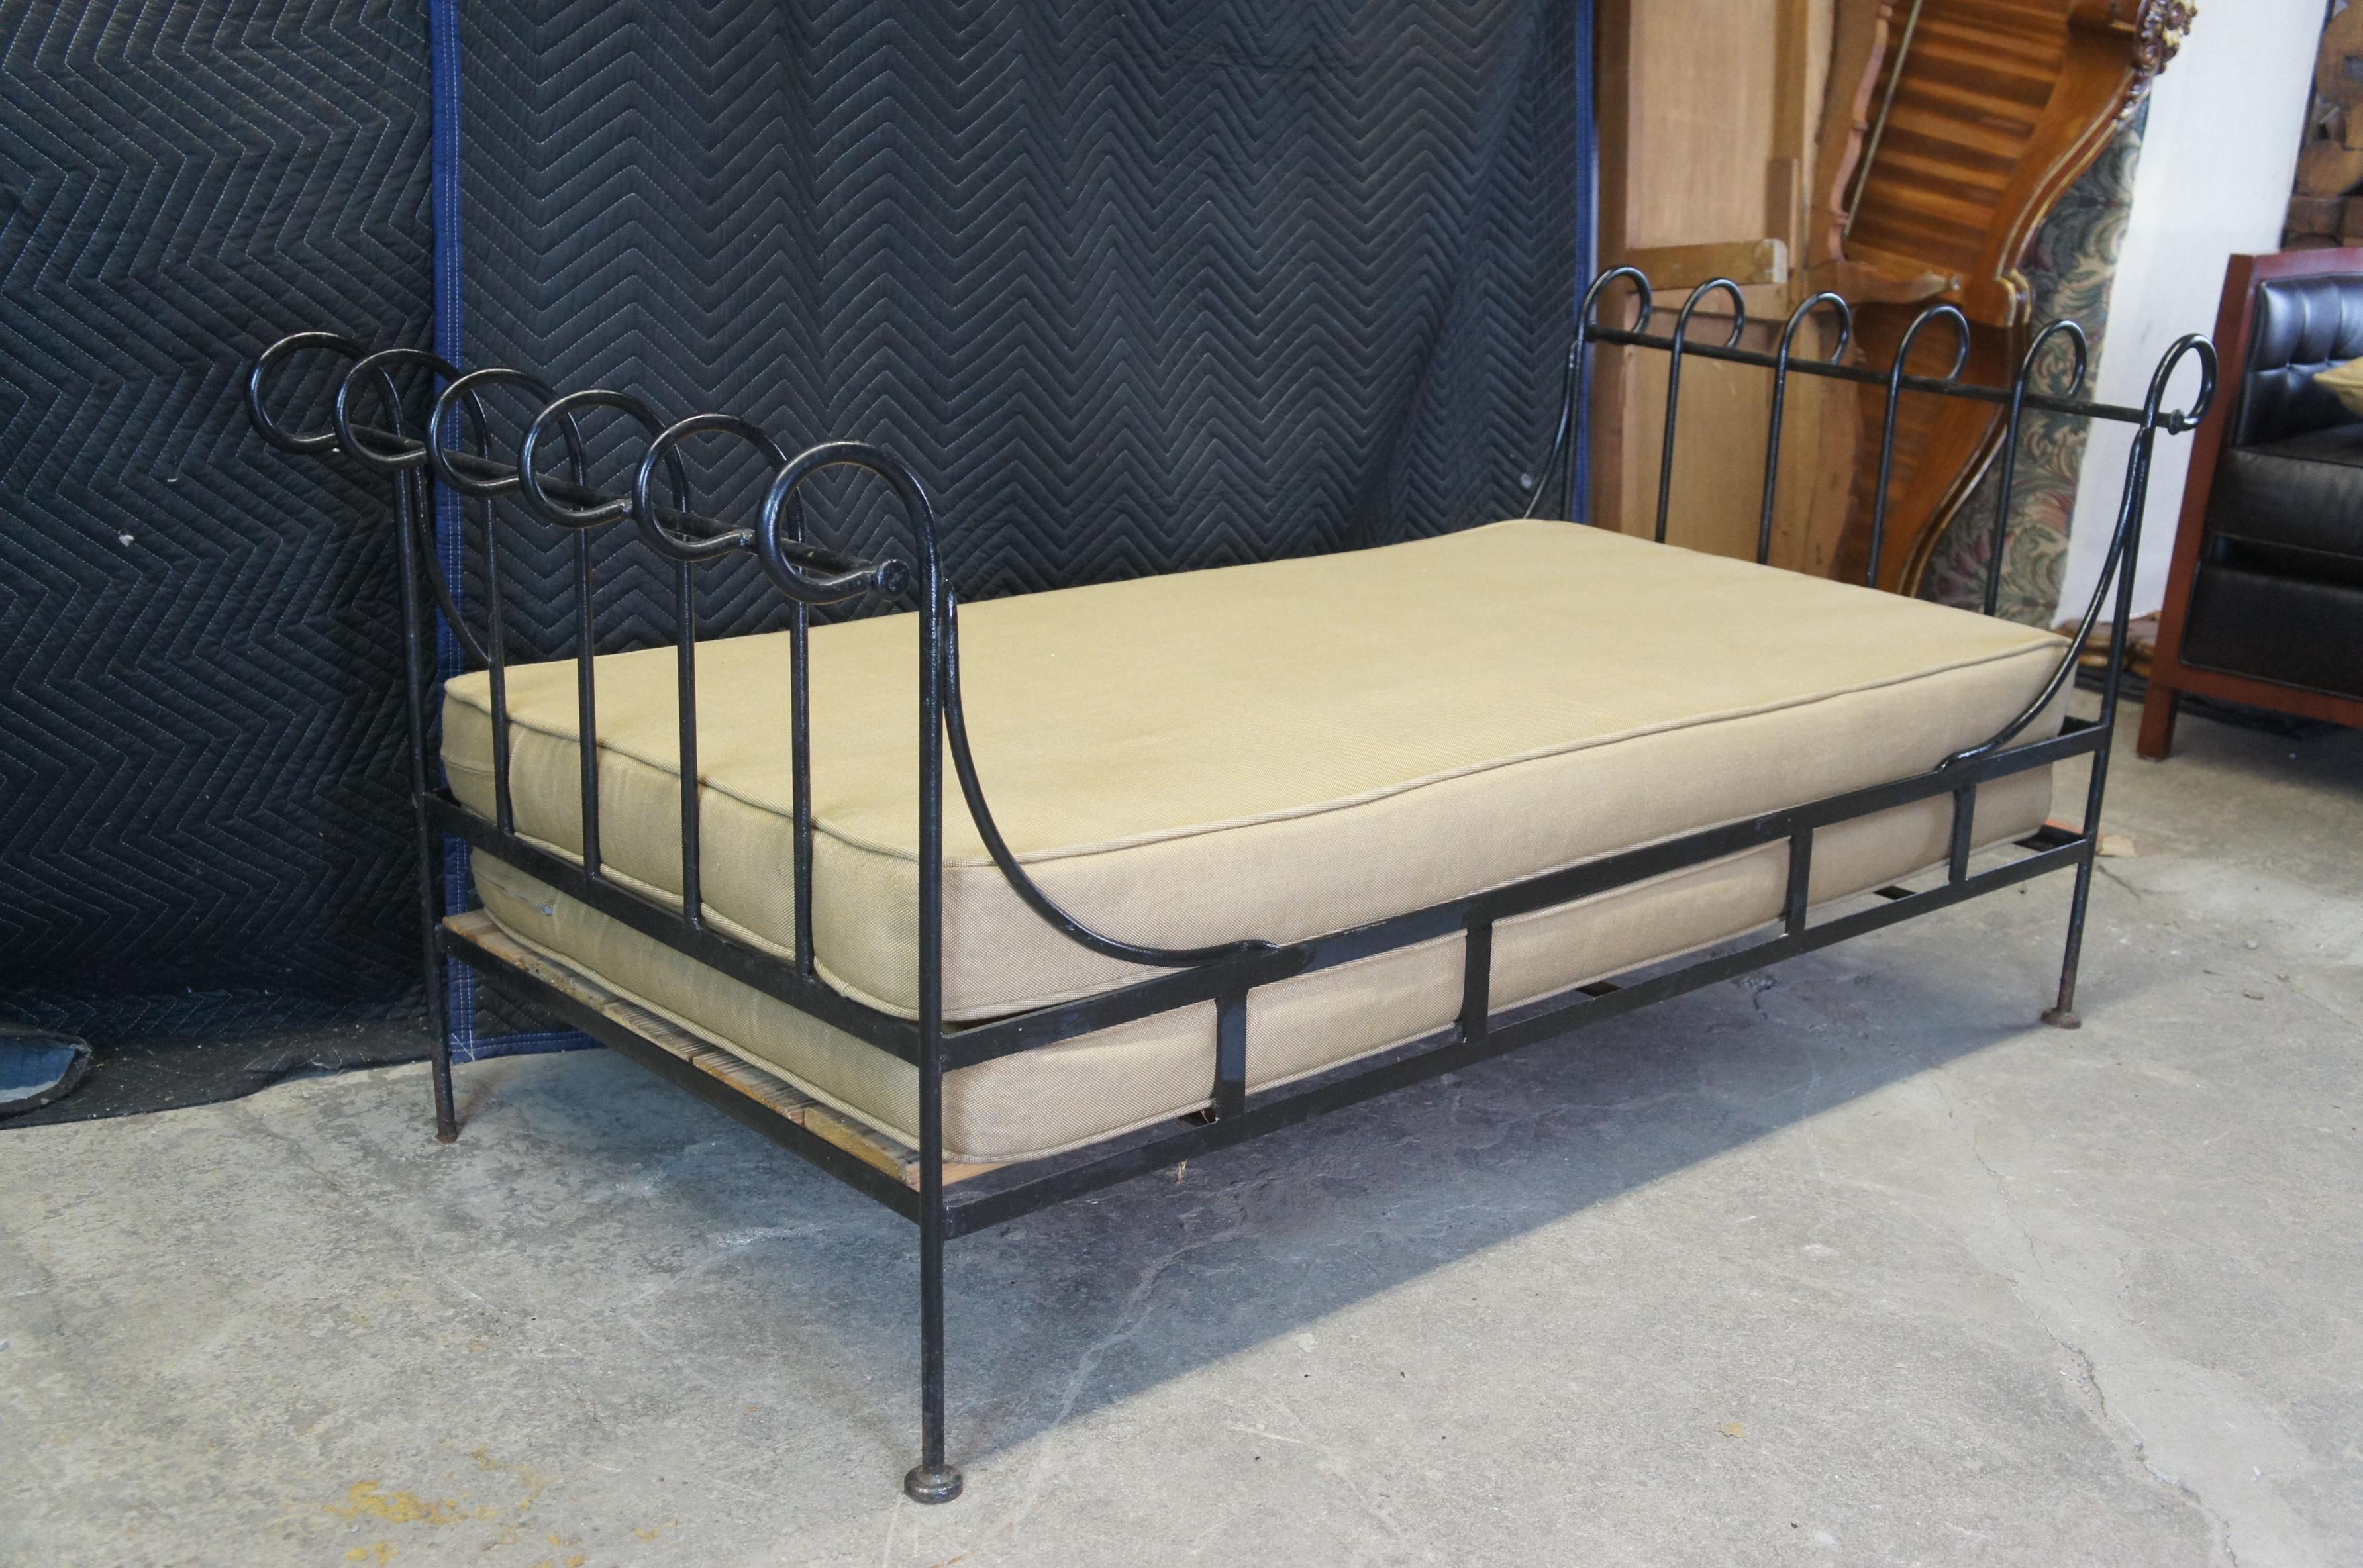 20th Century Vintage Neoclassical Directoire Style Scrolled Iron Outdoor Daybed Sofa 72